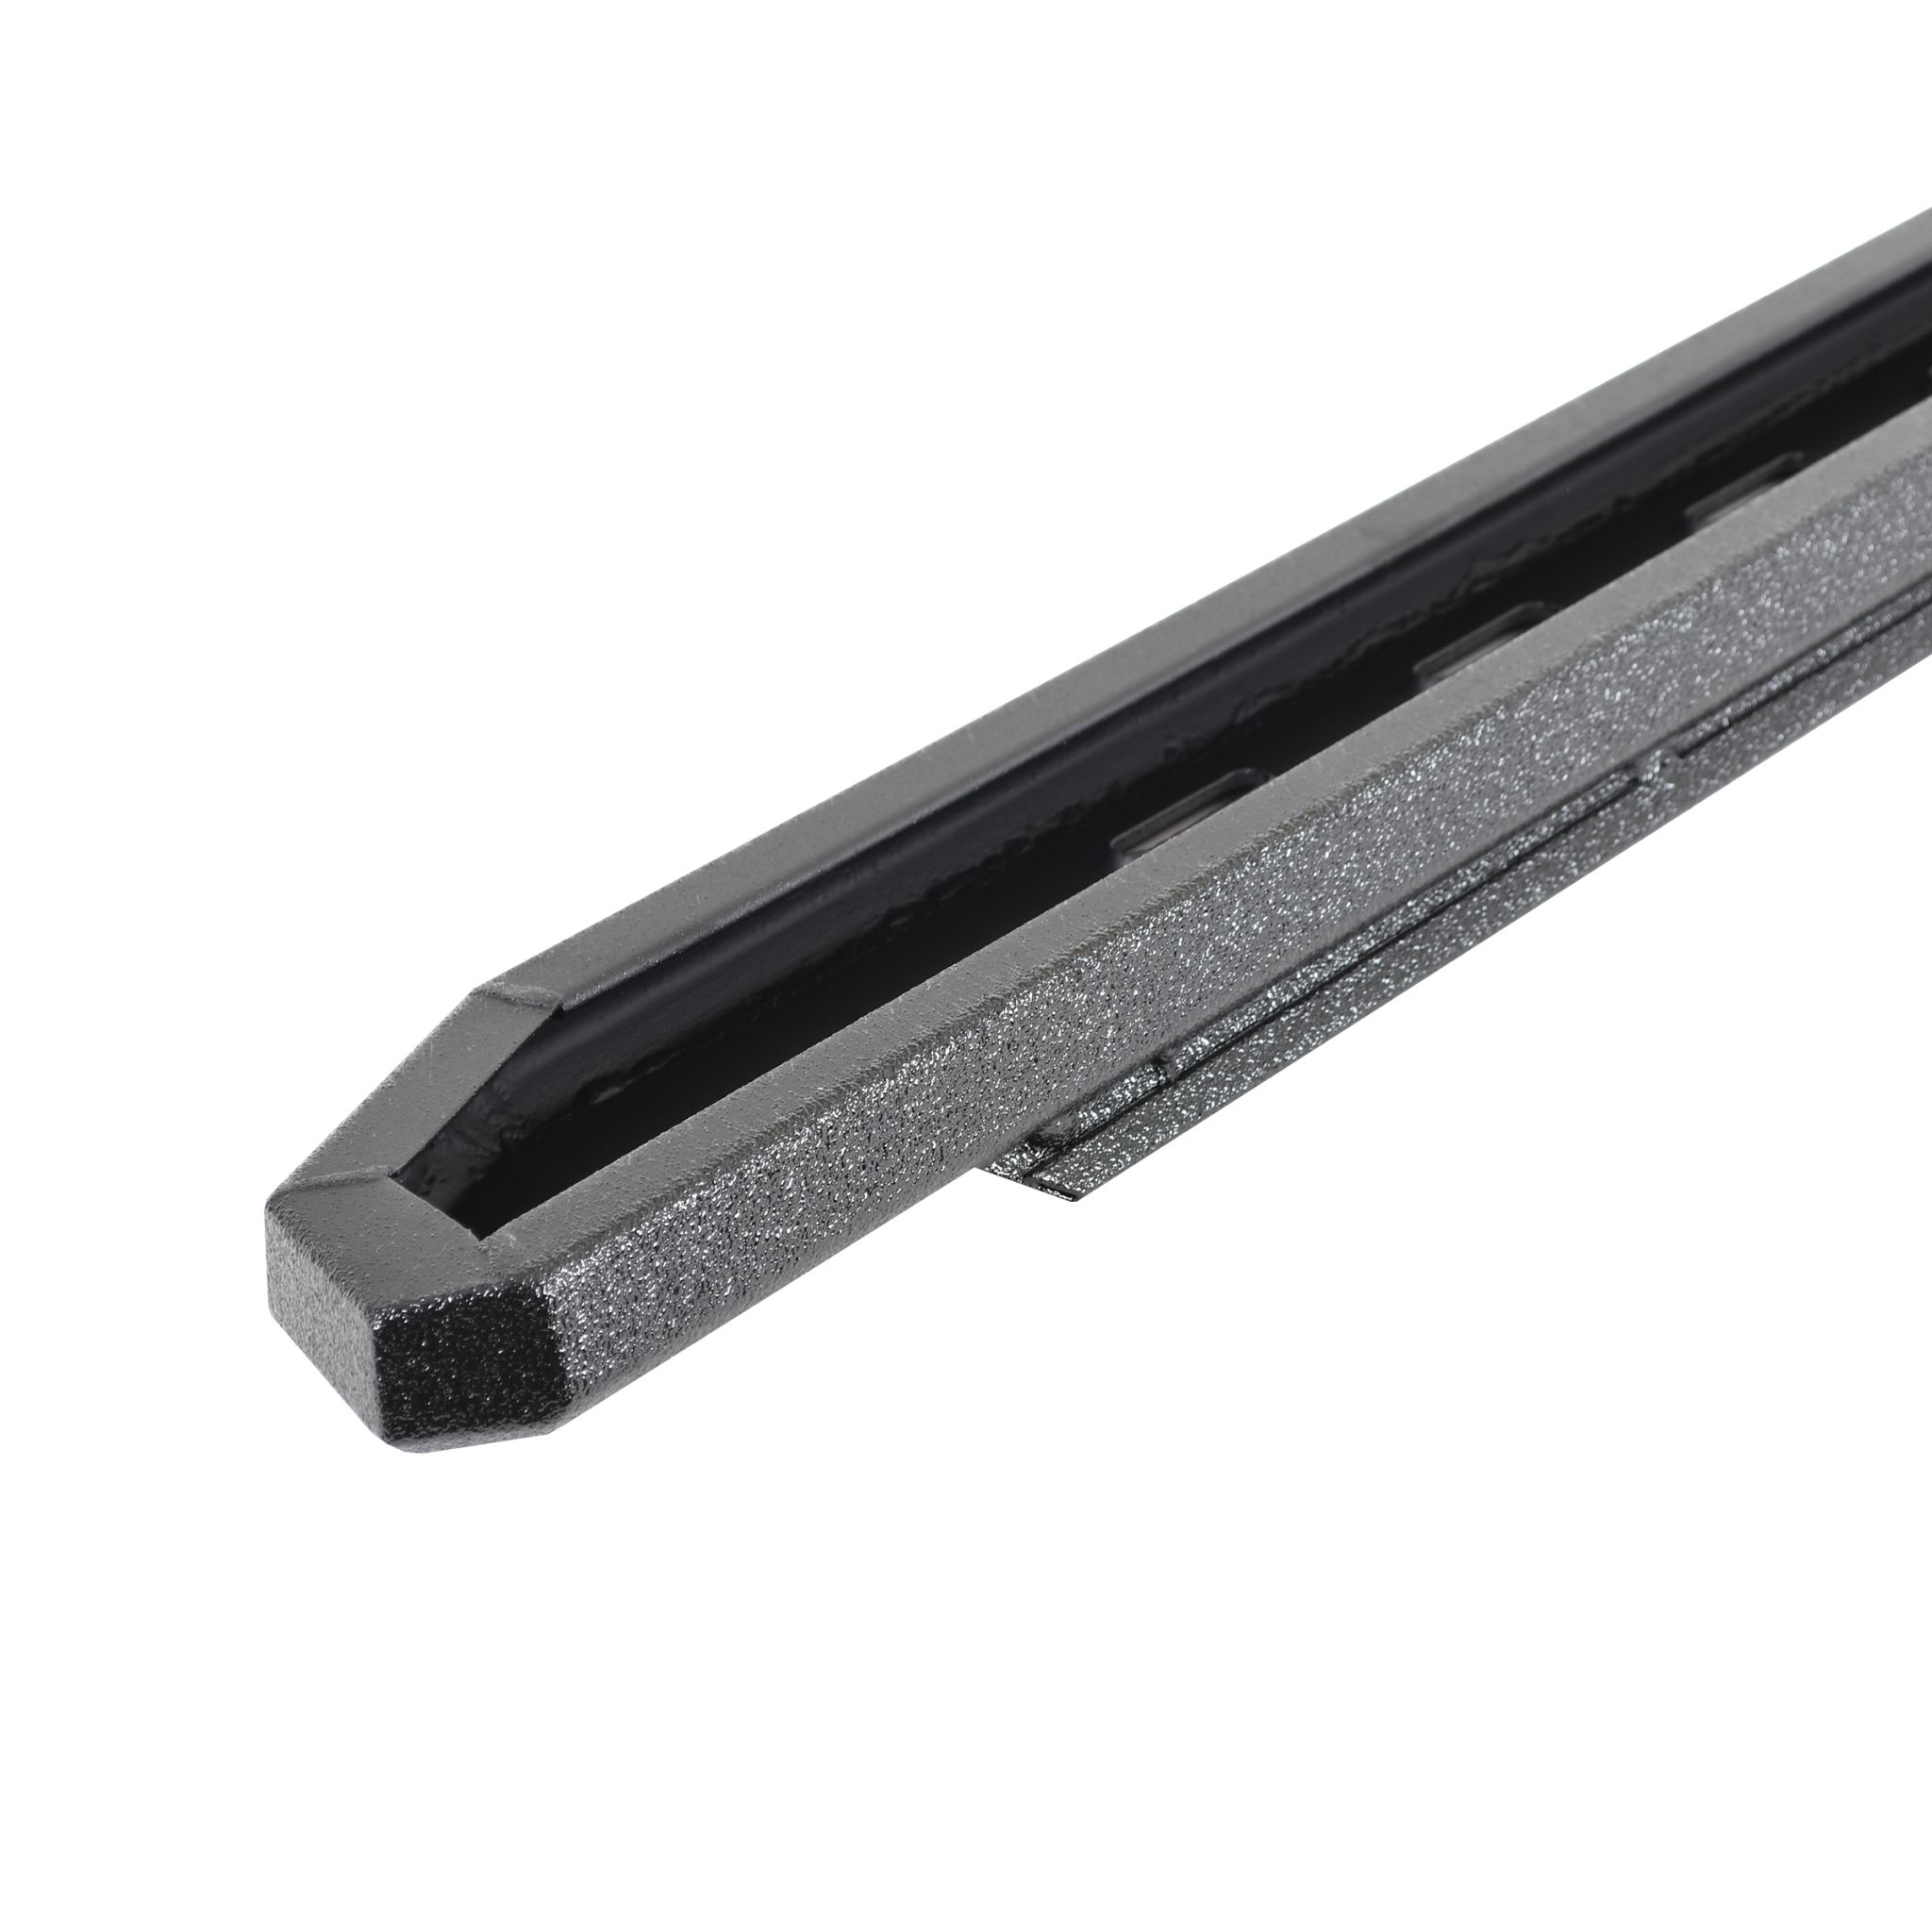 Go Rhino 69630687ST - RB30 Slim Line Running Boards with Mounting Bracket Kit - Protective Bedliner Coating